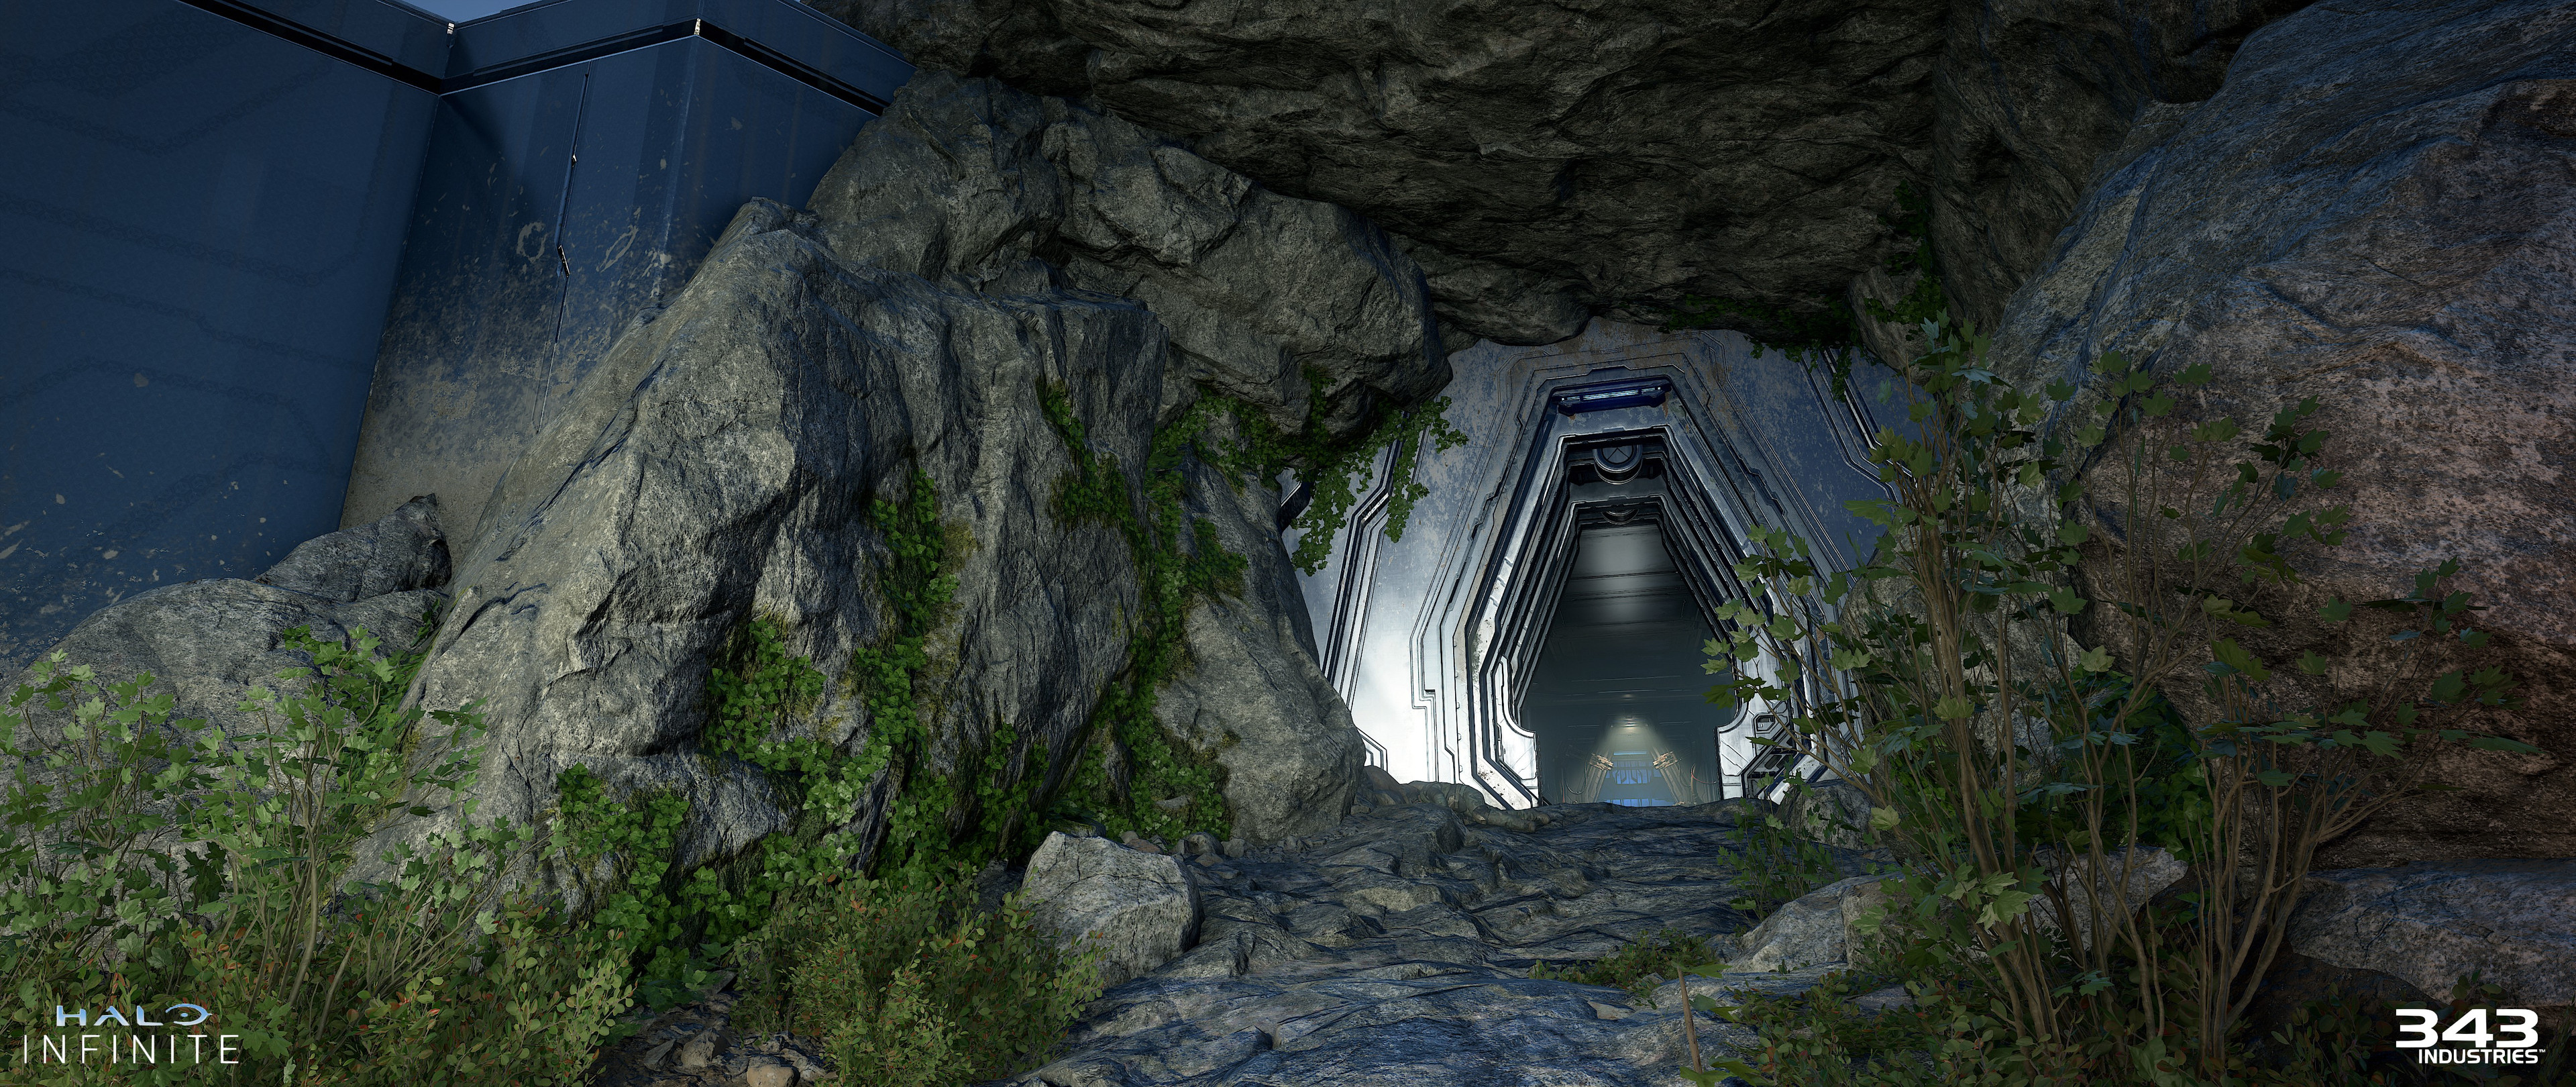 Responsible just for polish and cleanup, vegetation around cave entrance, and detailing with smaller rock assets.